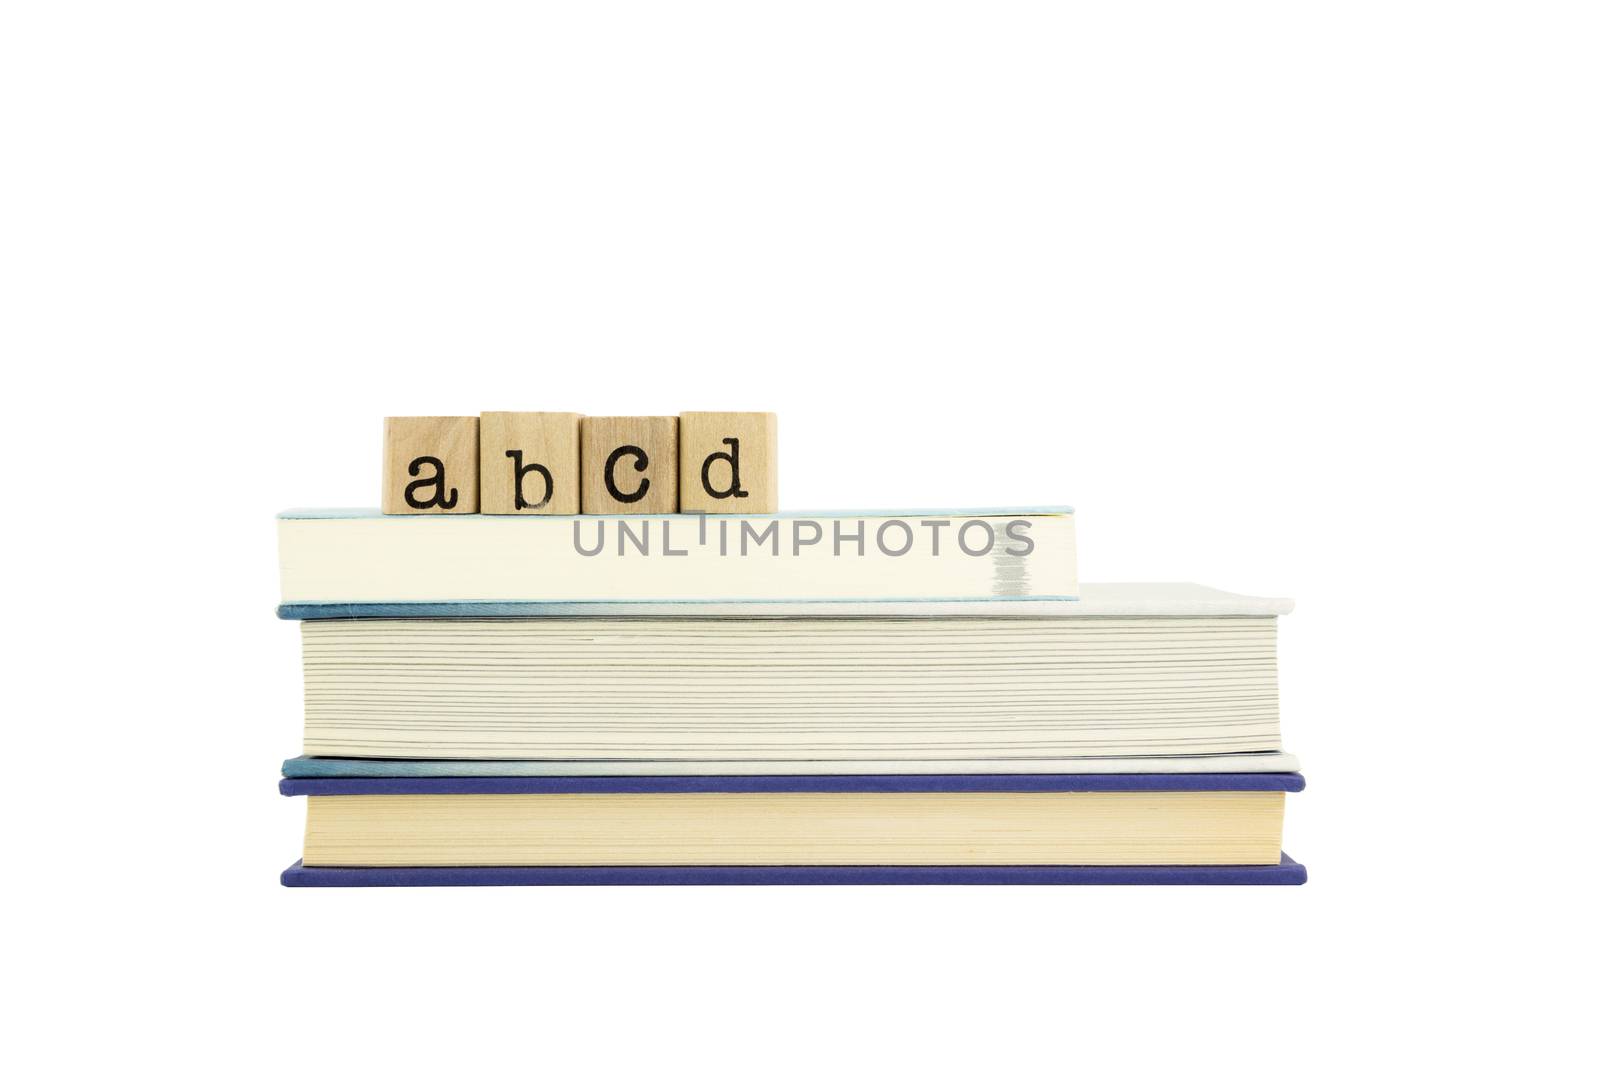 abcd word on wood stamps and books by vinnstock